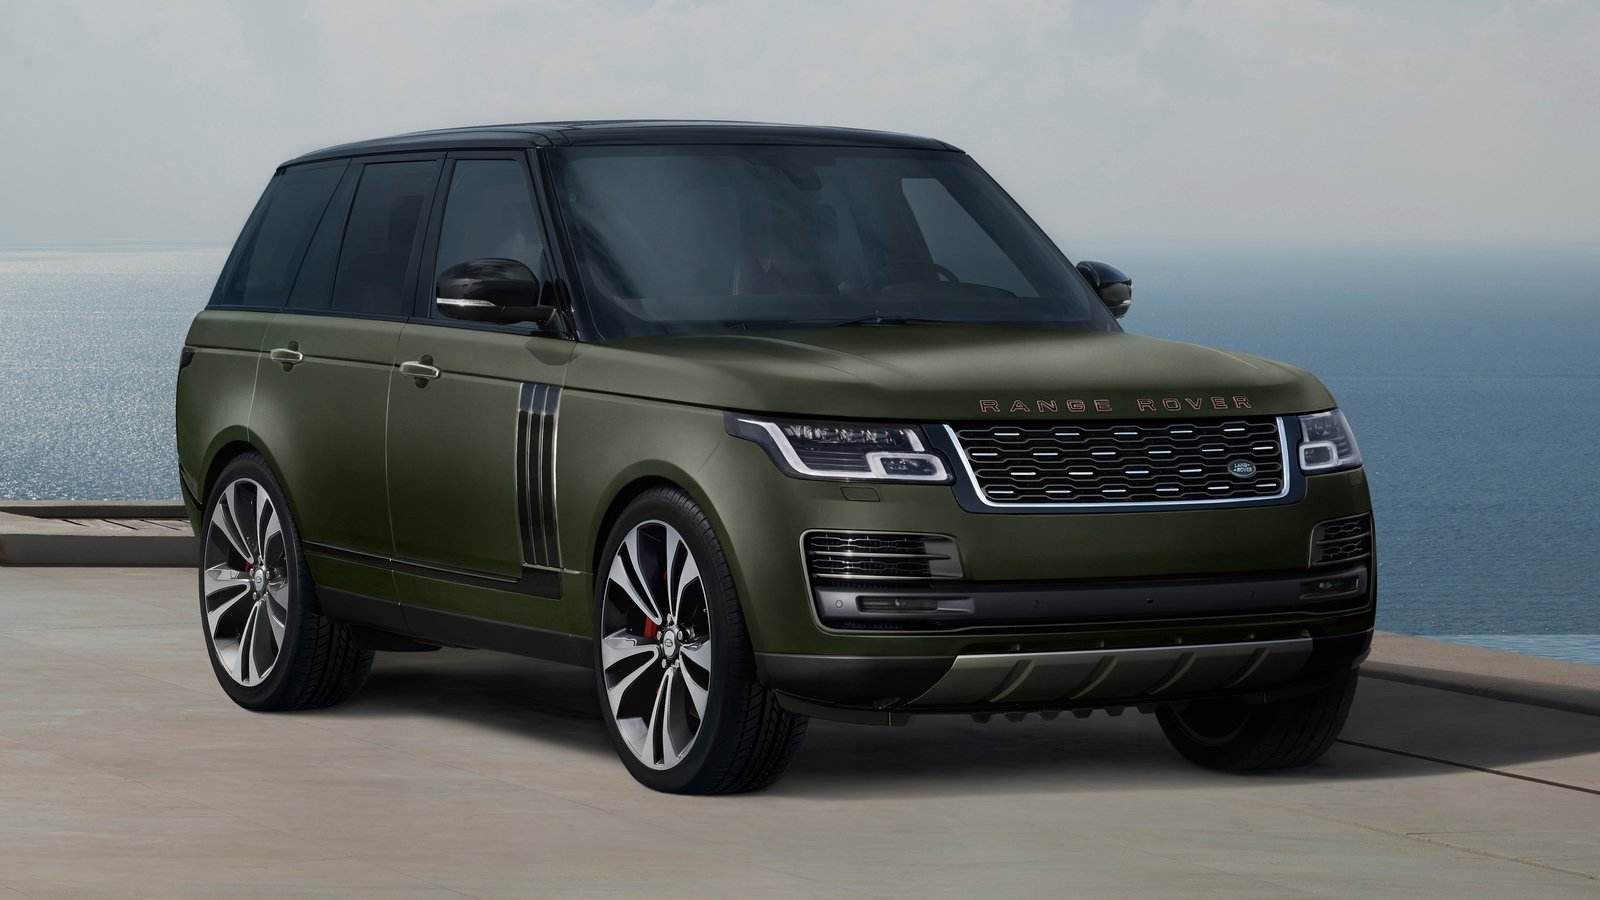 The Range Rover SVAutobiography Ultimate editions will be launched in India in the coming months. Image: Land Rover